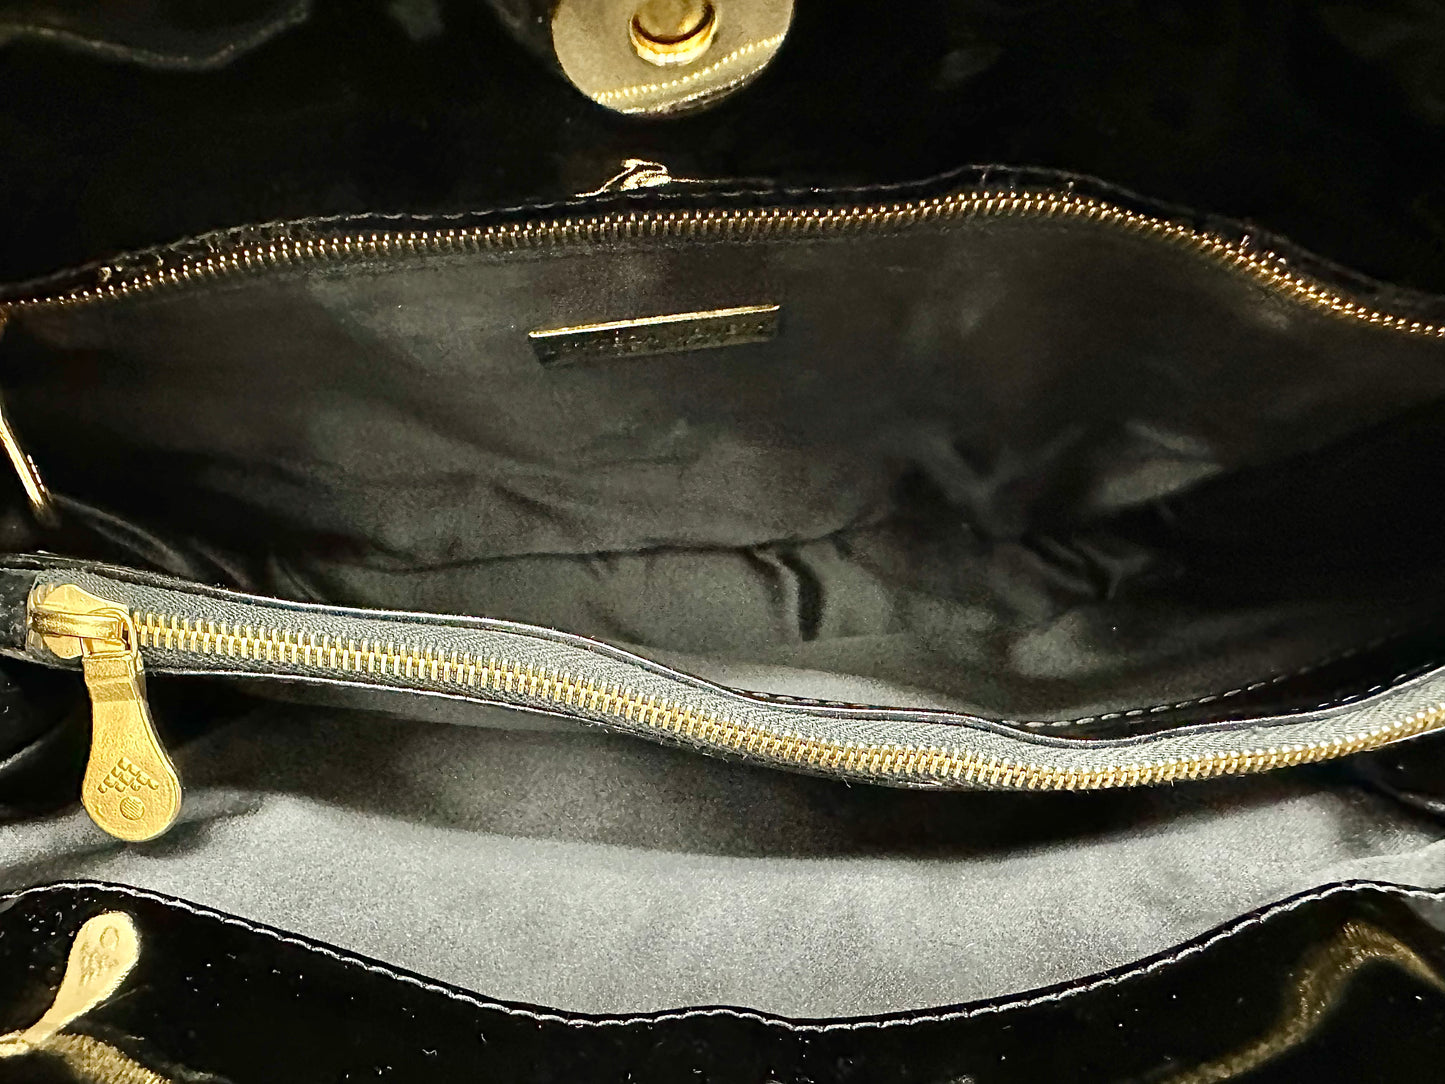 Black interior of bag with 1 zip-pocket and 2 other compartments